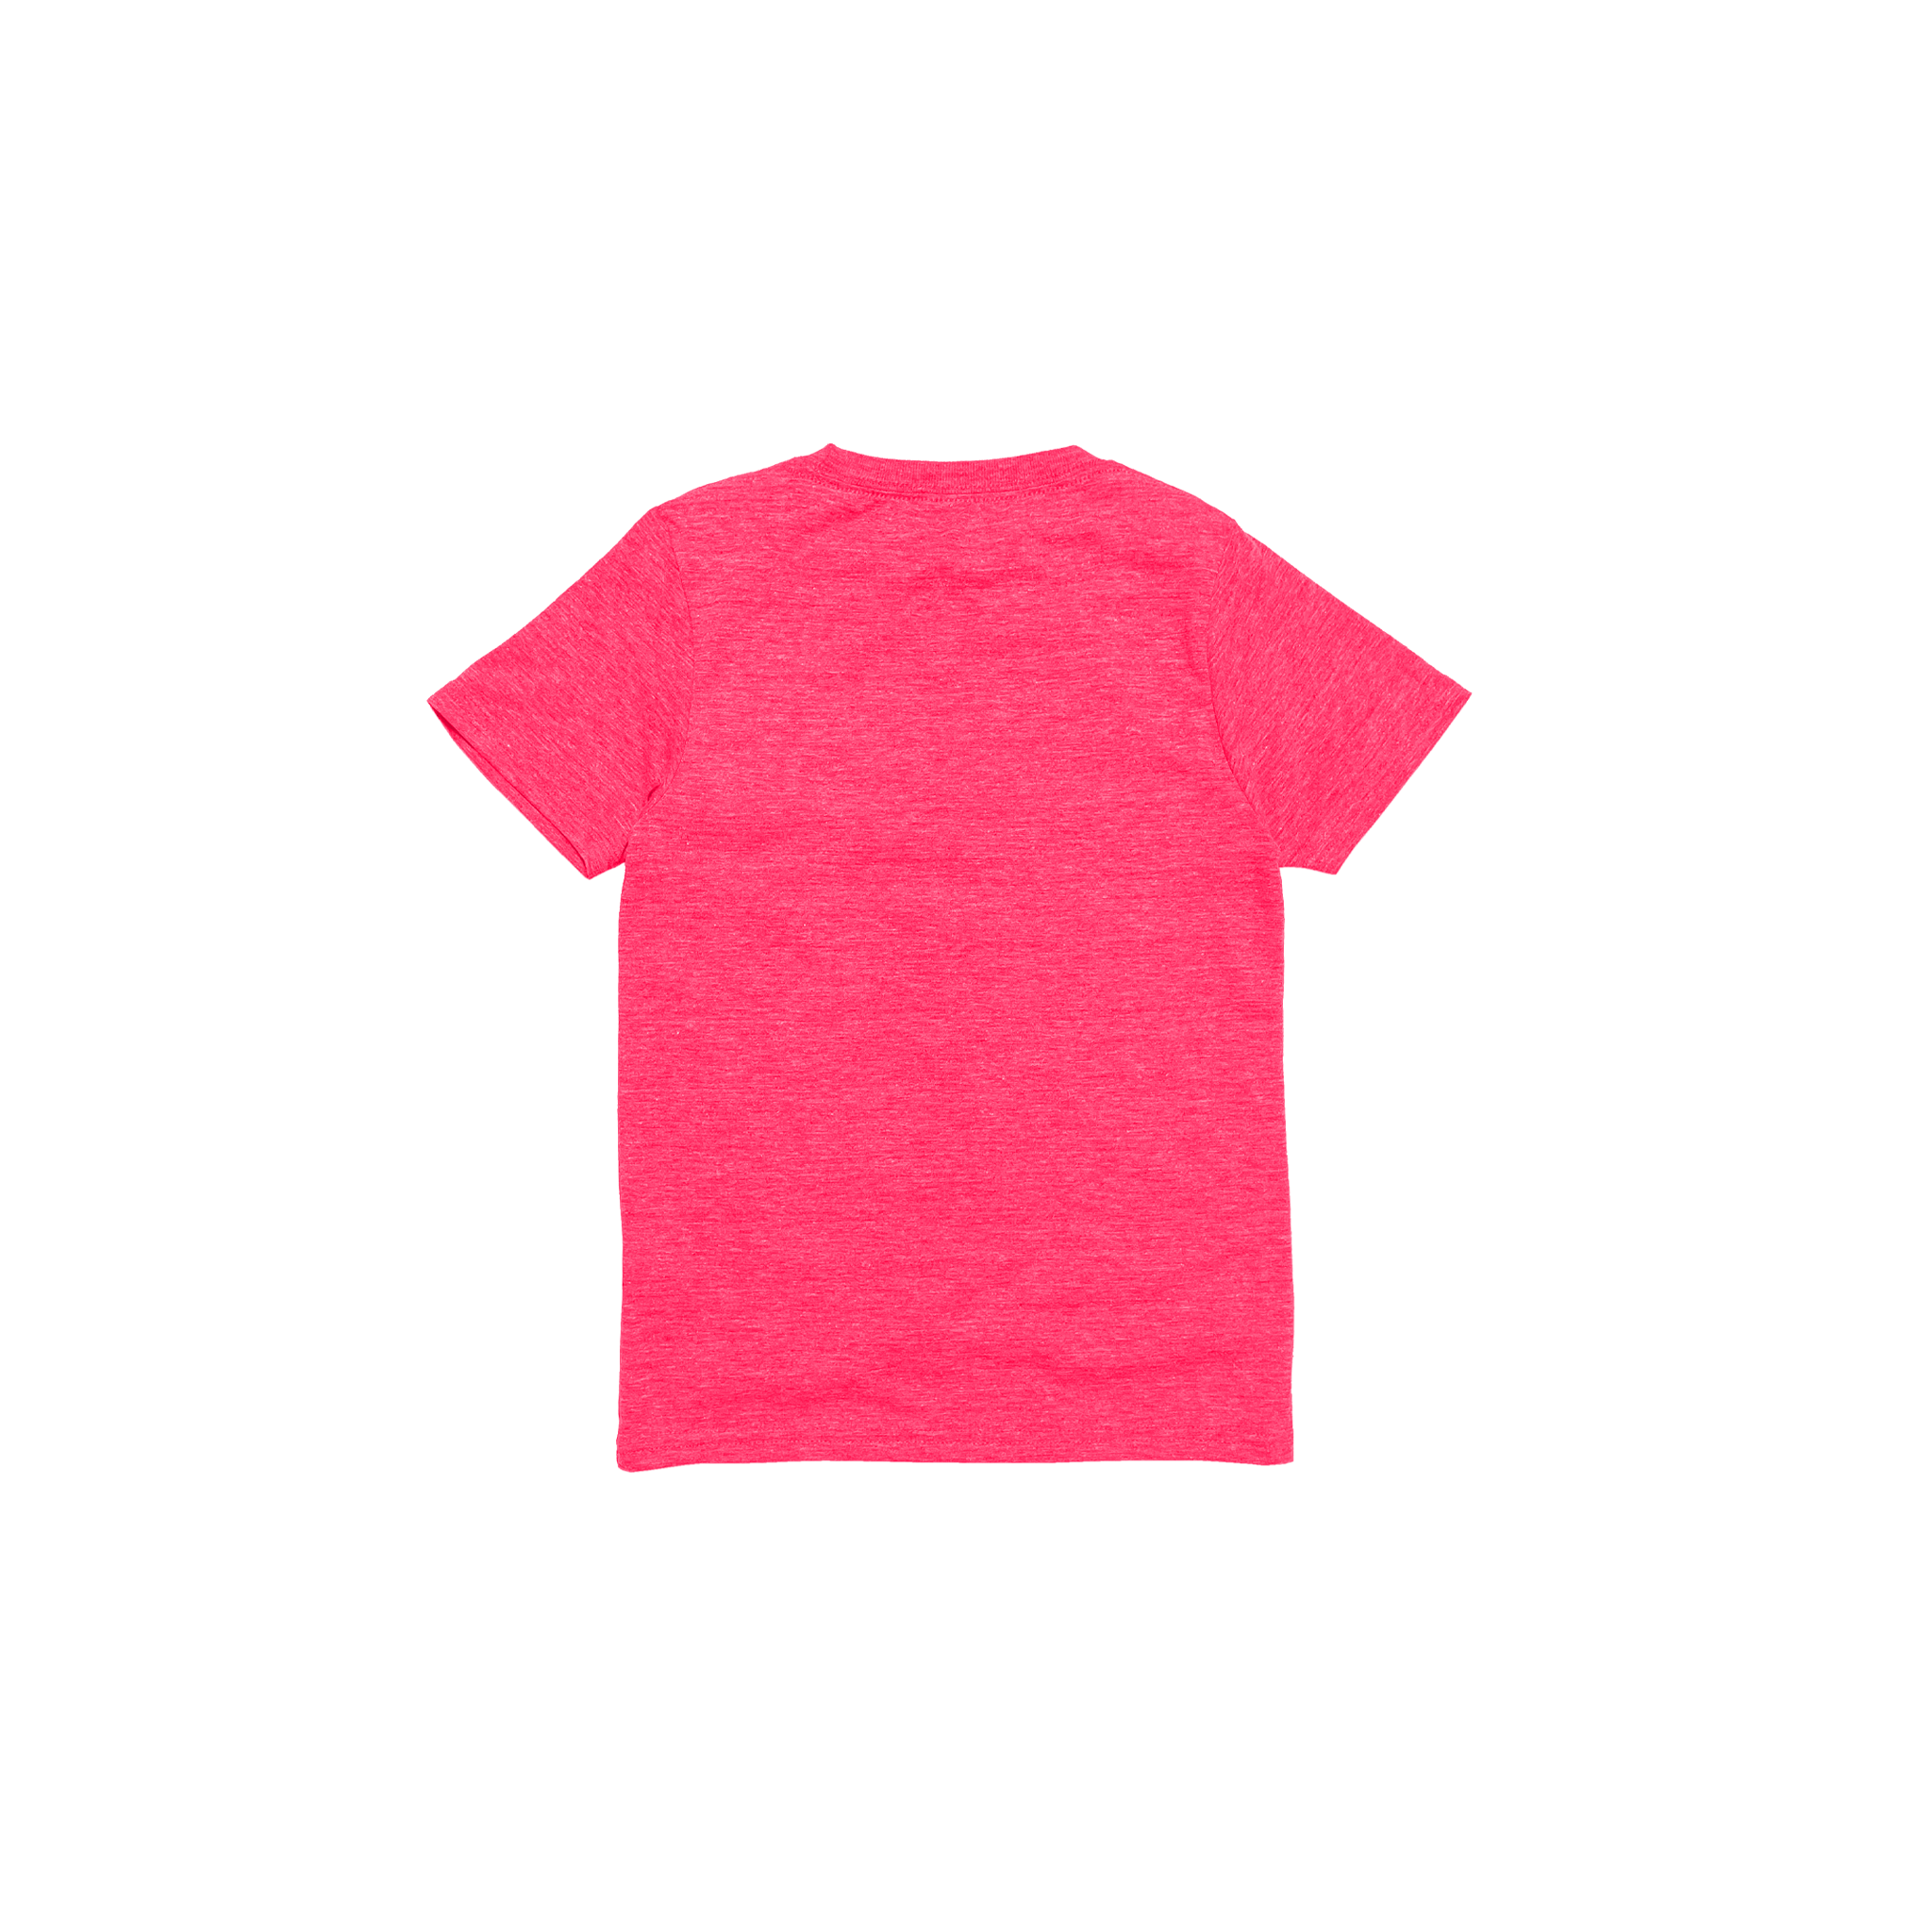 Back Flat Lay of GOEX Youth Eco Triblend Tee in Neon Pink